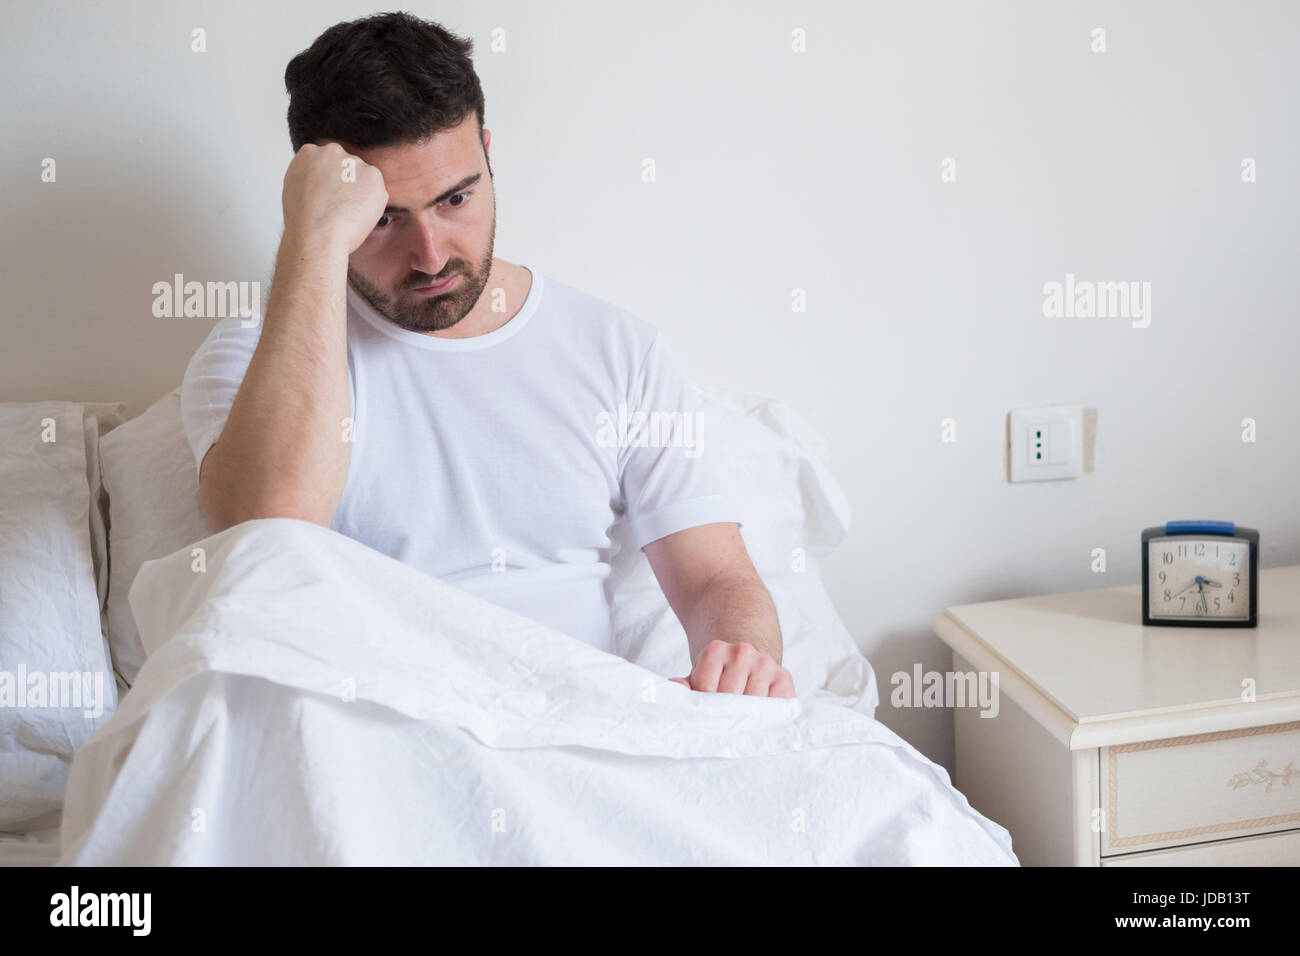 Sad and upset man waking up in the morning light Stock Photo